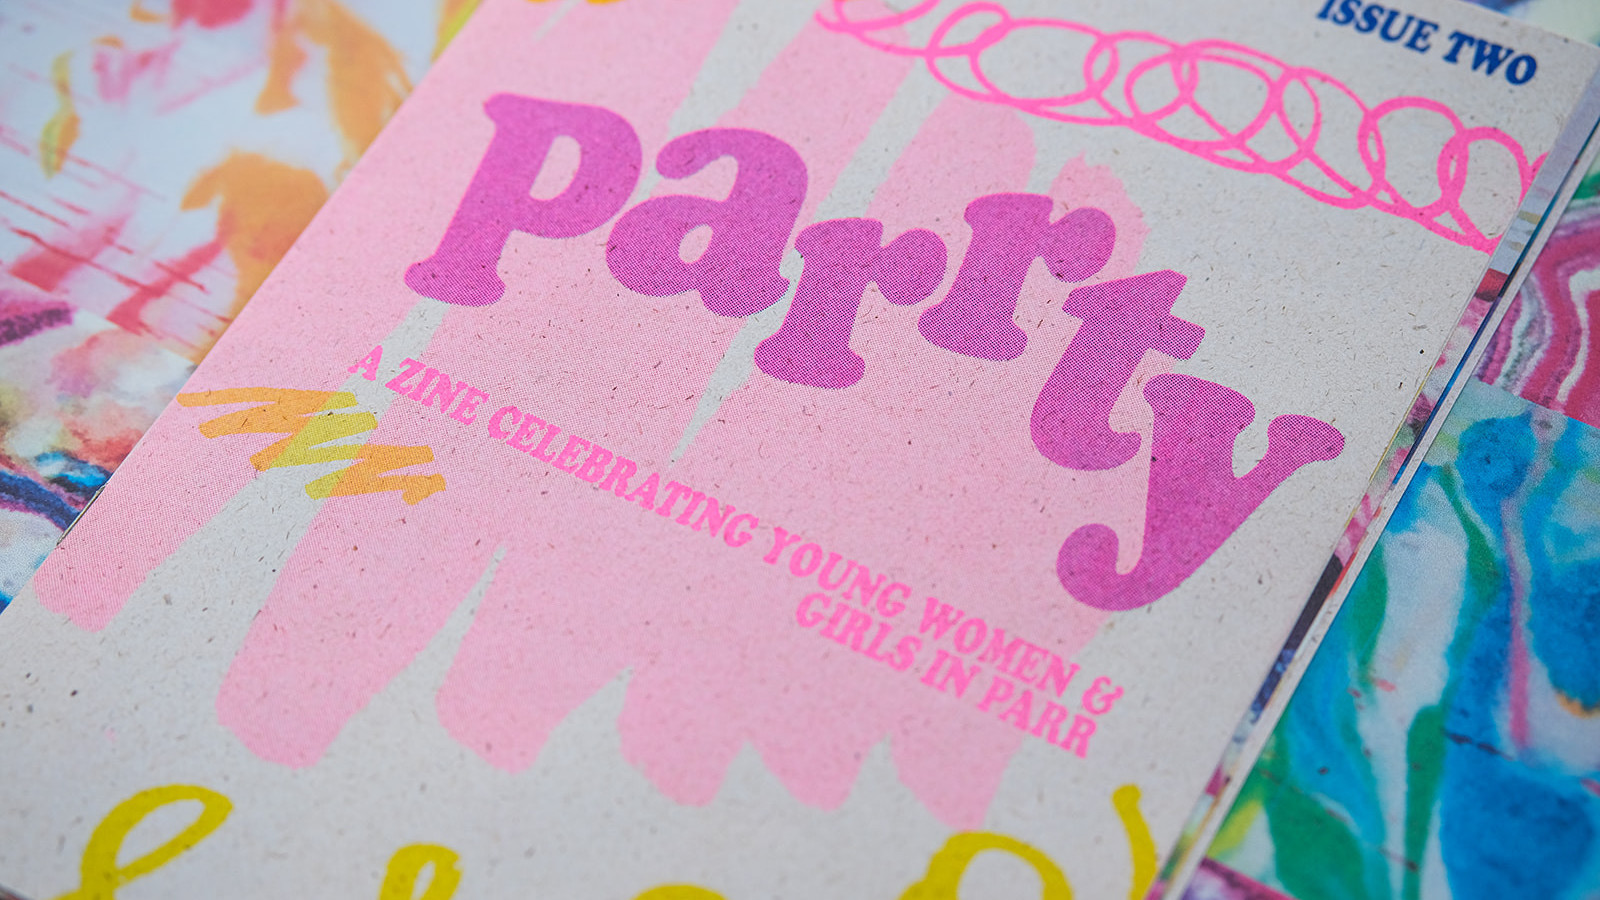 Front cover of Parrty Zine Issue Two.